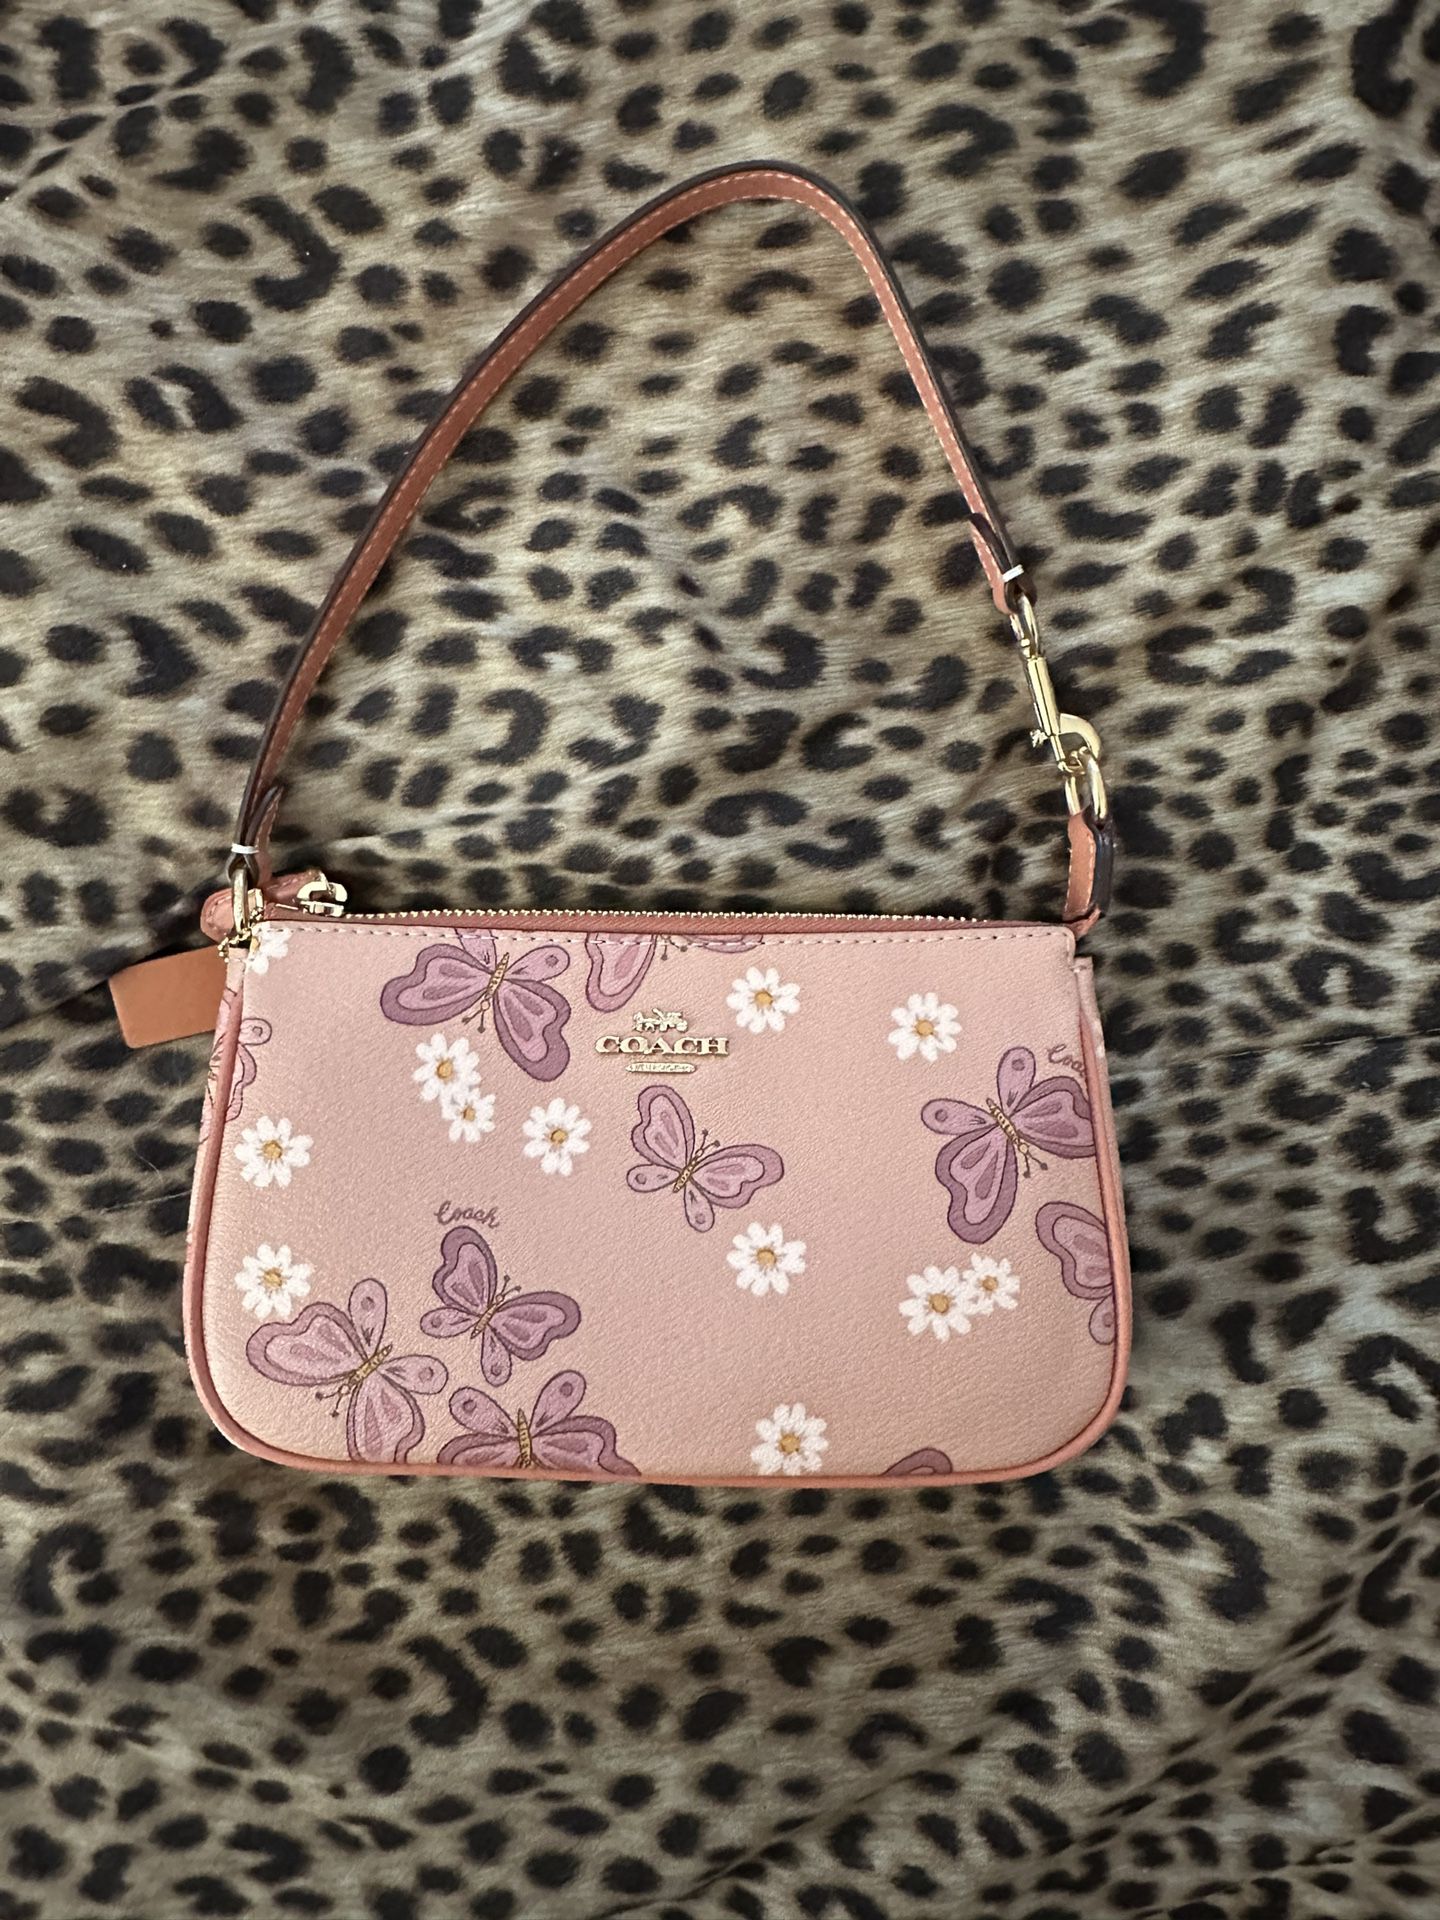 Coach Sierra Satchel Bag Full Size- New for Sale in Issaquah, WA - OfferUp